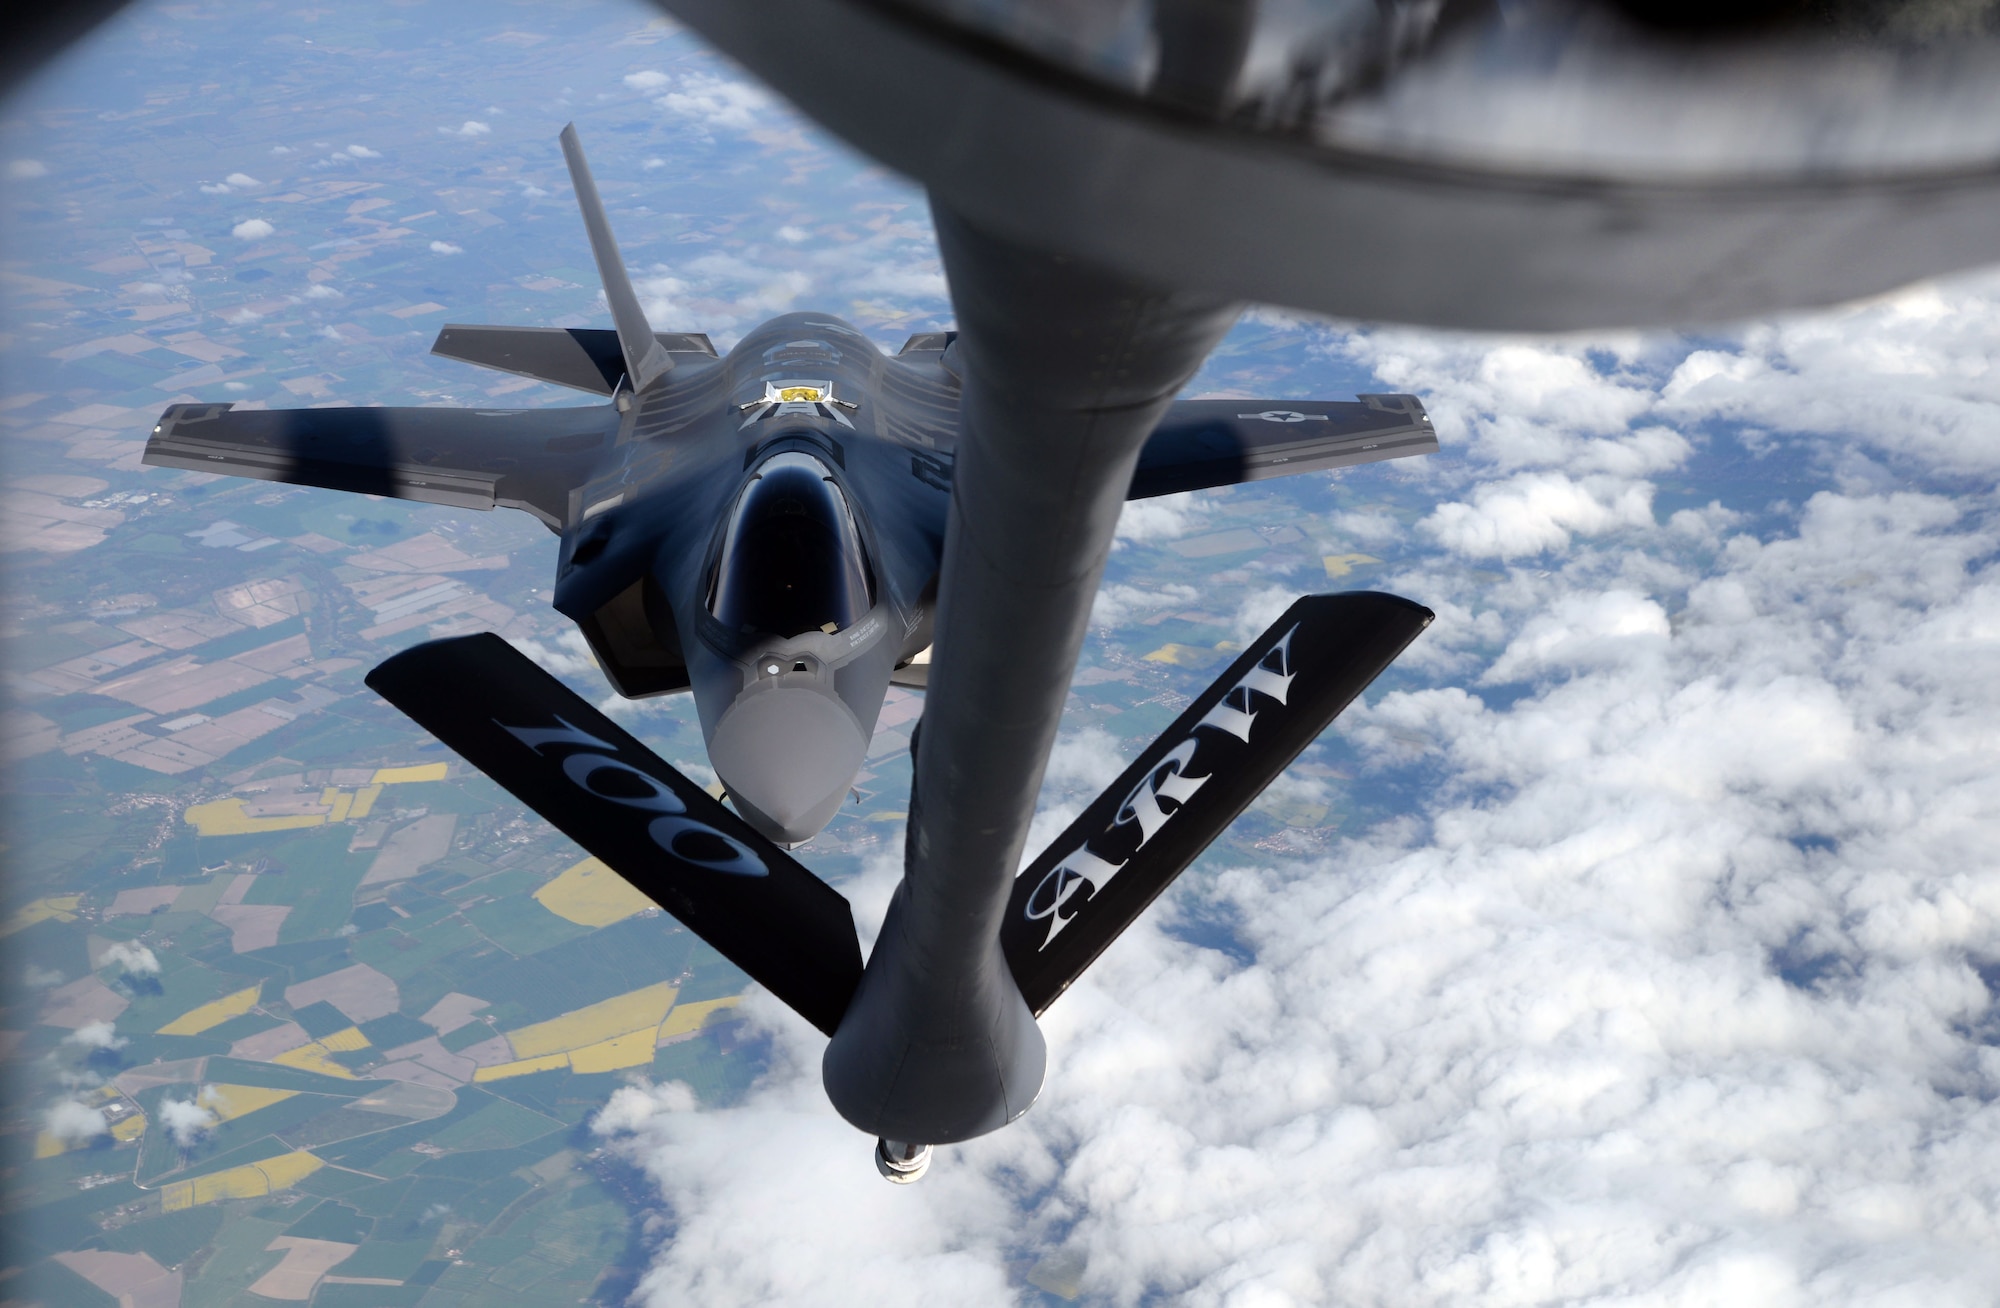 A U.S. Air Force F-35A Lightning II aircraft assigned to Hill Air Force Base, Utah, is refueled by a 100th Air Refueling Wing KC-135 Stratotanker during a flight to Estonia, April 25, 2017. The F-35s participated in a first-ever flying training deployment to Europe, and the forward deployment to Estonia allowed Airmen to better understand NATO's current infrastructure and strengthen interoperability with allies. (U.S. Air Force photo by Senior Airman Christine Groening) 
